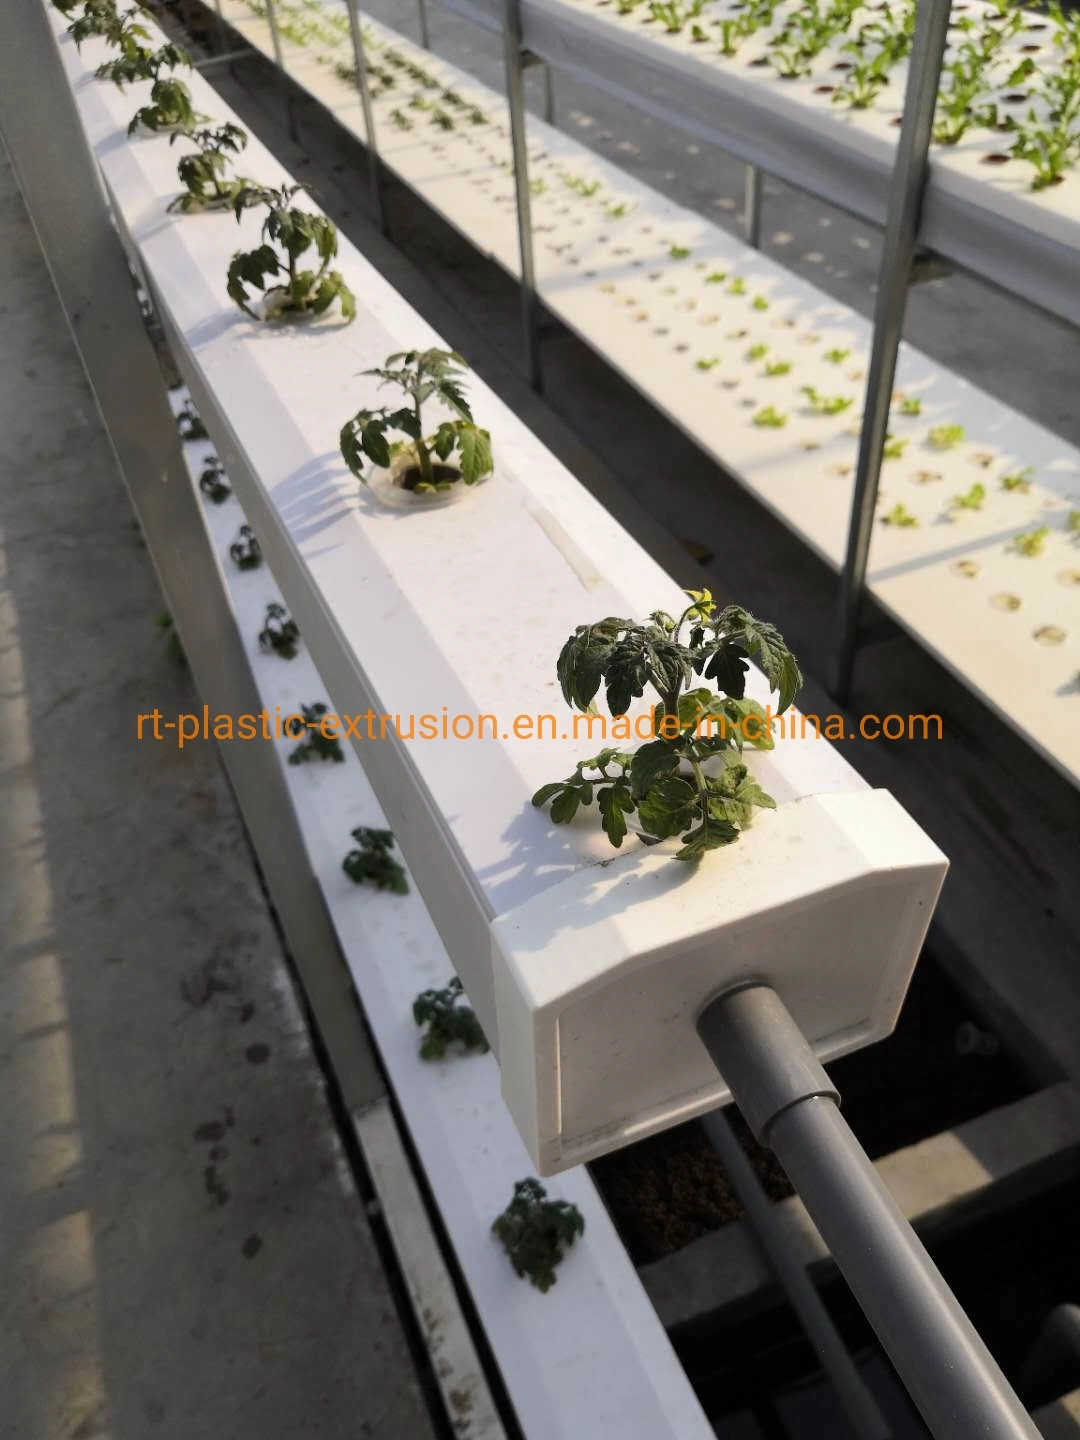 Soilless Cultivation for Vertical Farm/Nft Hydroponics System